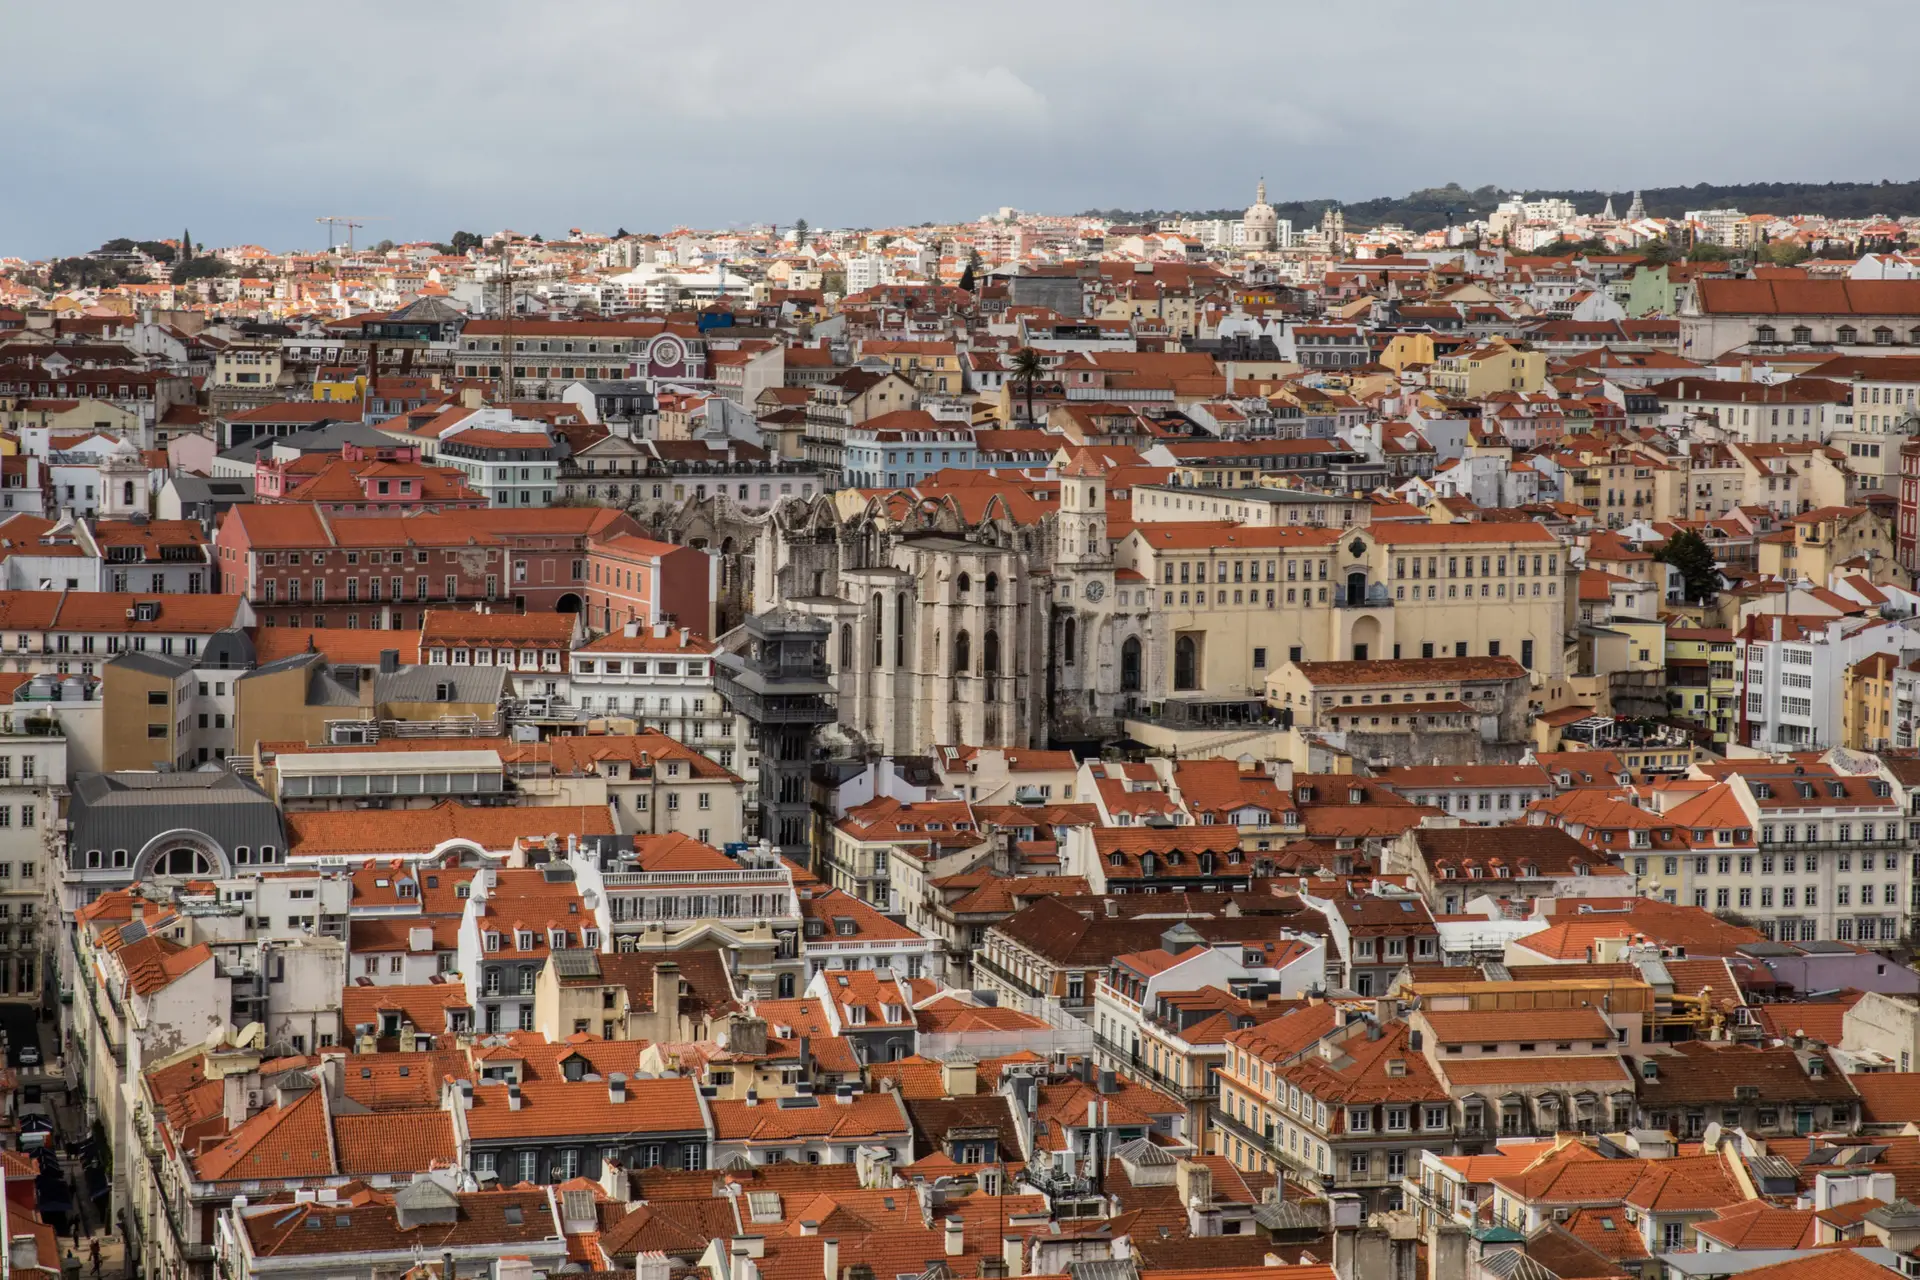 A view of the Igreja do Carmo (C) from the Castelo de S. Jorge (São Jorge Castle) in Lisbon, Portugal, on March 31, 2022. São Jorge Castle is a historic castle in the Portuguese capital of Lisbon, located in the freguesia of Santa Maria Maior. (Photo by Manuel Romano/NurPhoto via Getty Images)